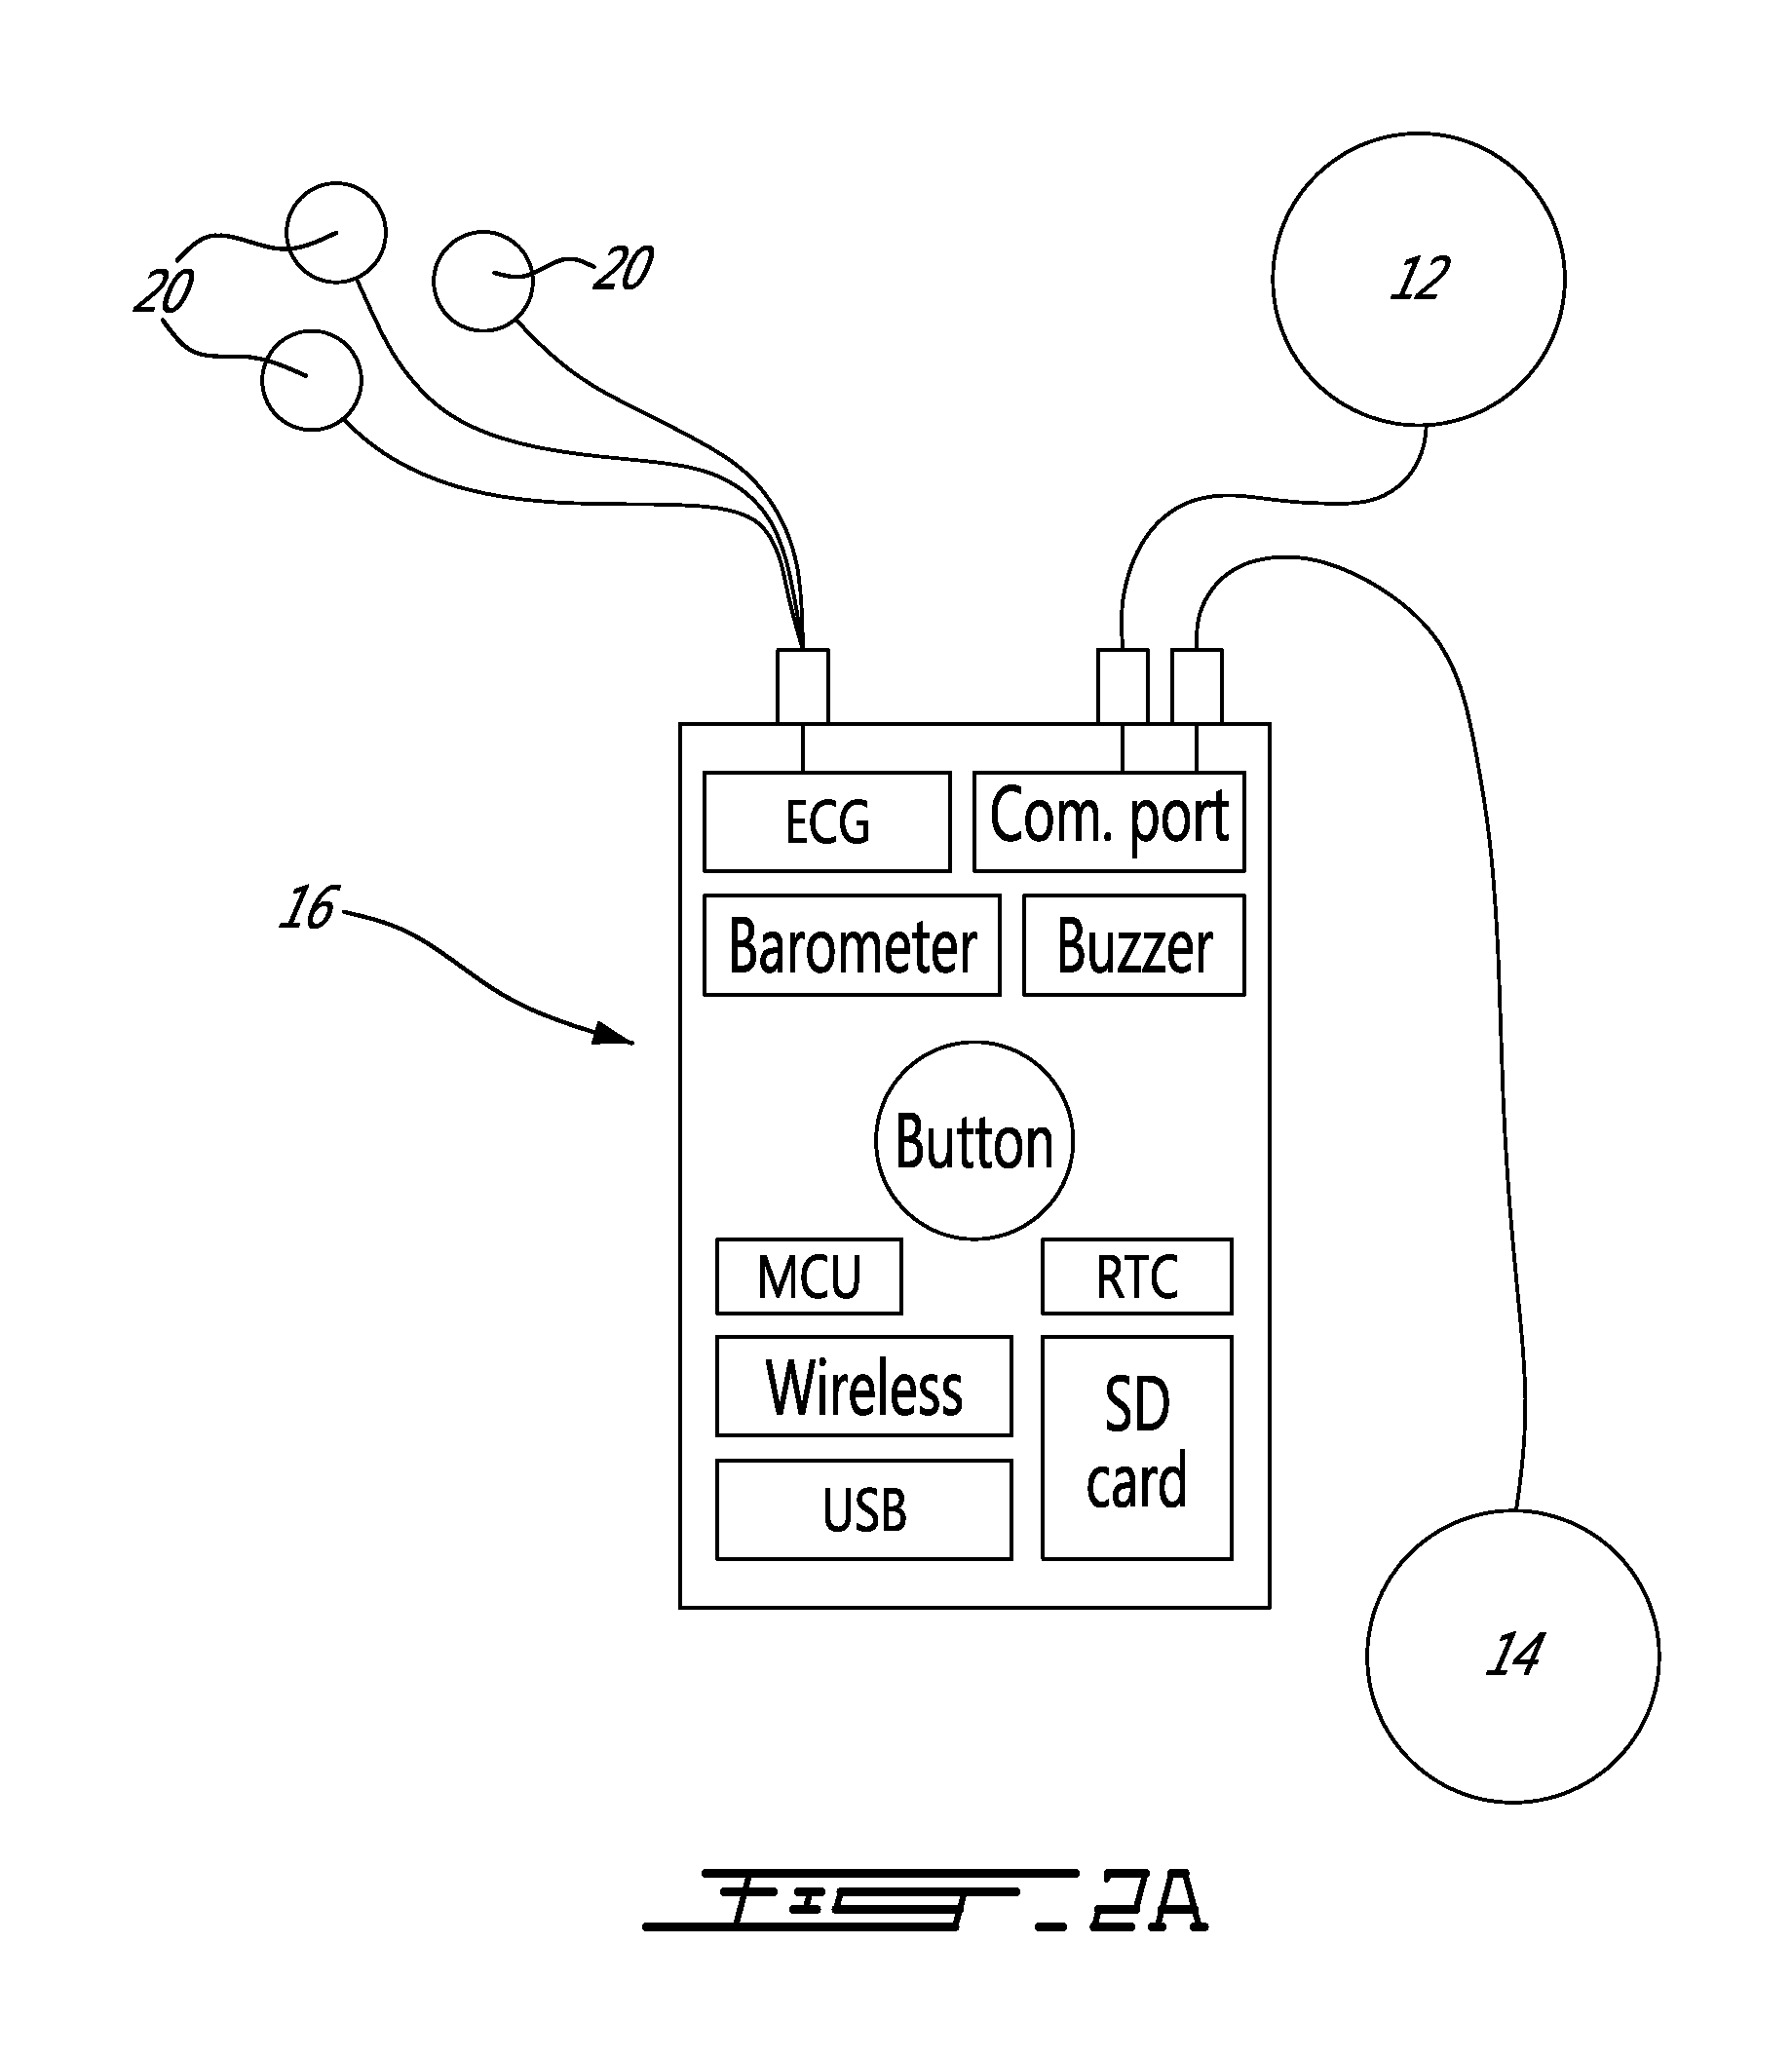 Activity, posture and heart monitoring system and method